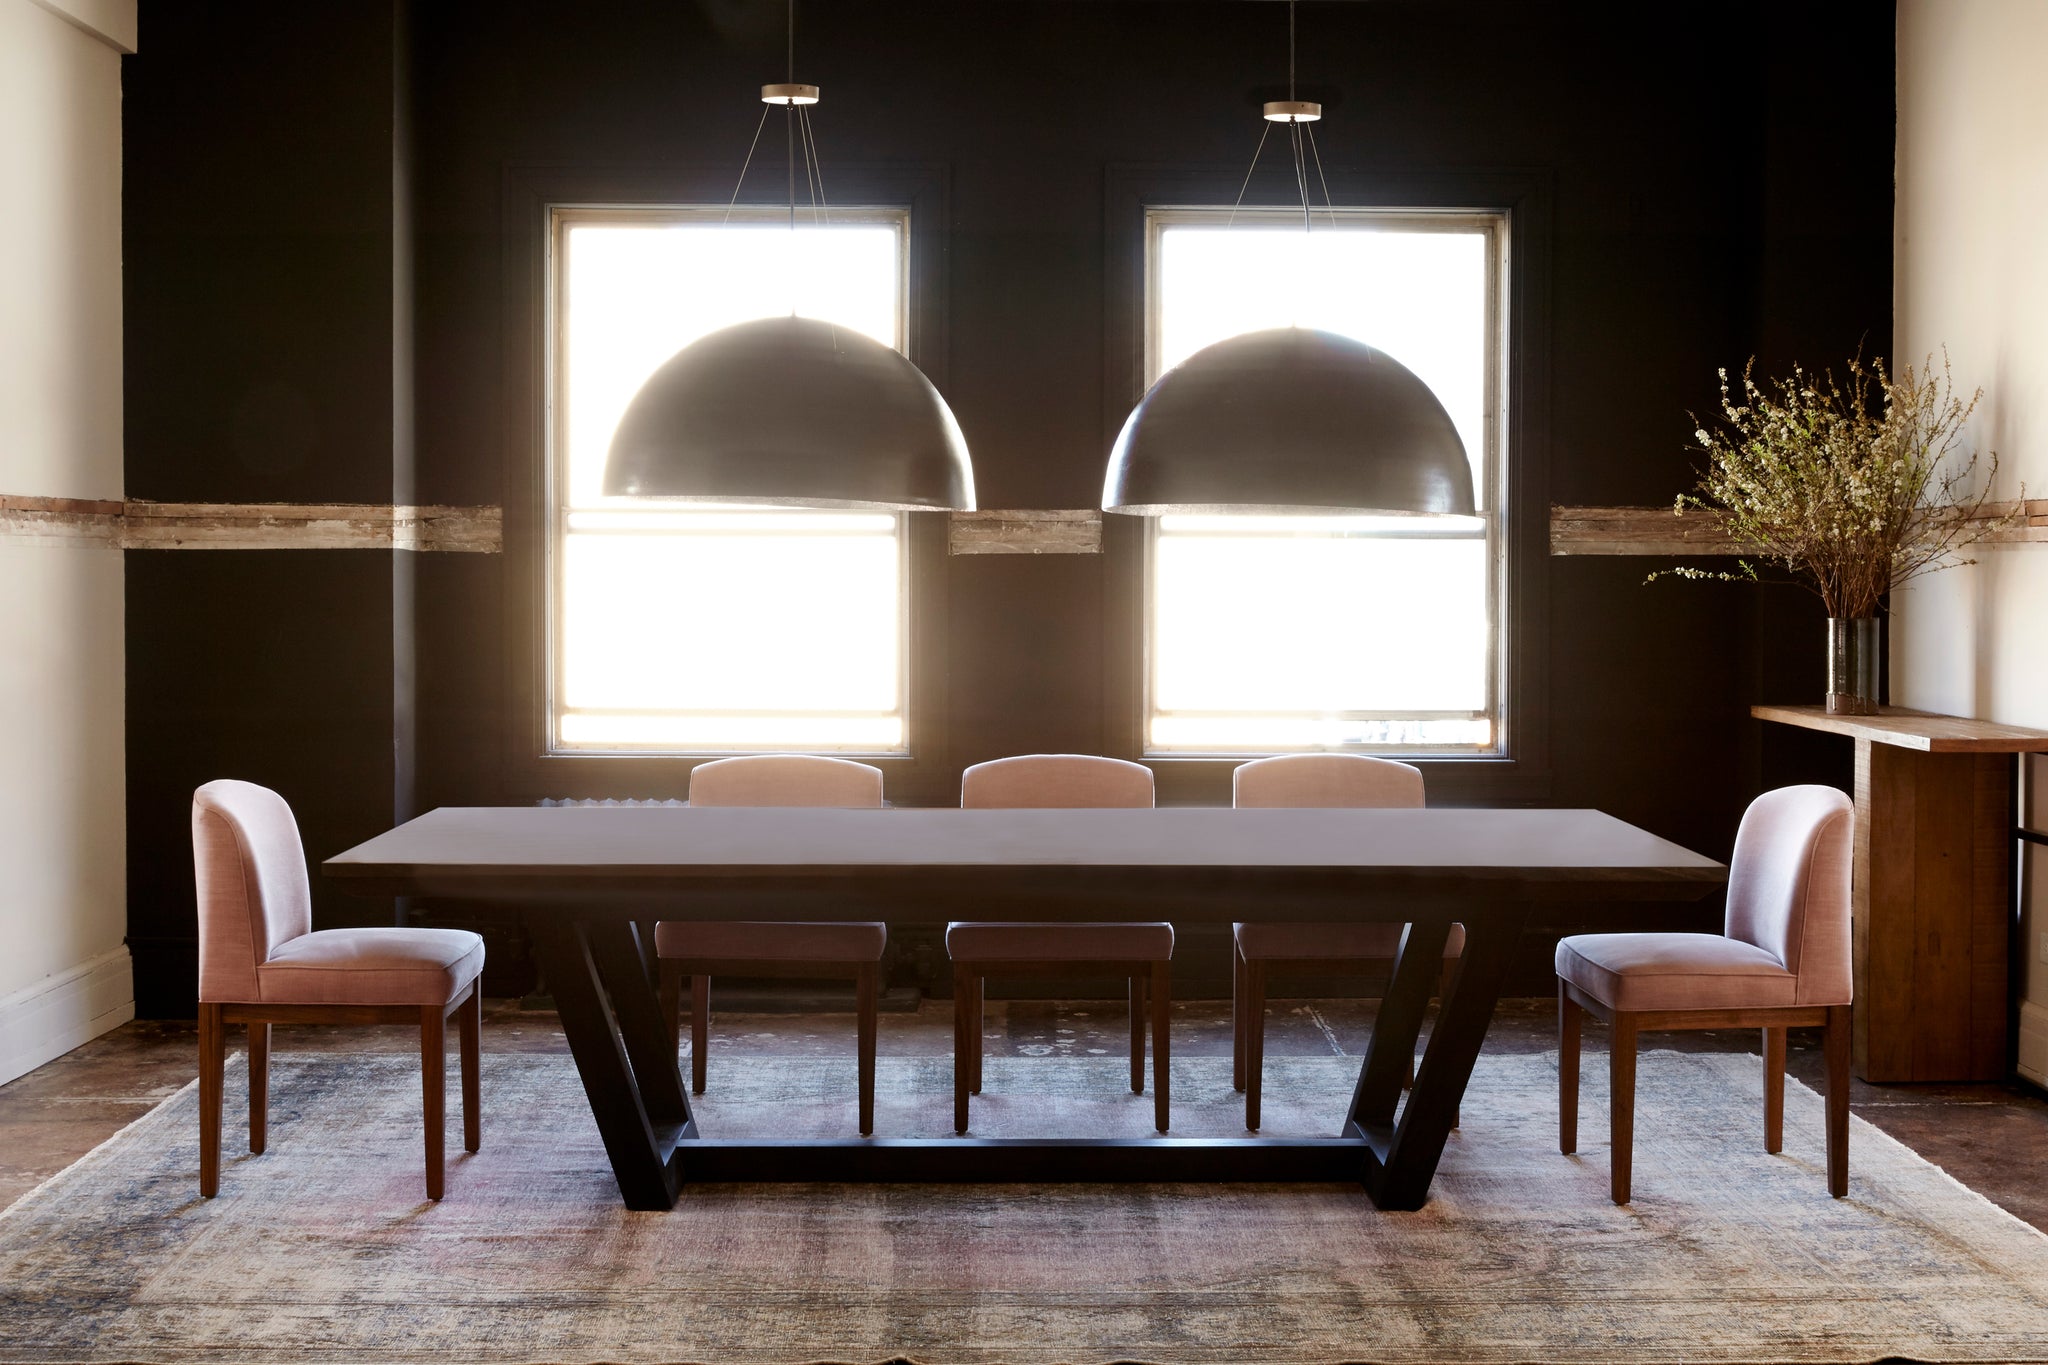  Dining room photo. Rectangular dining table with five dining chairs placed around it which are upholstered in a pink fabric and have wood bases. There are two black circular pendants hanging above the dining table and the room has a black accent wall with two large windows. All the furniture is sitting on top of a grey rug.  